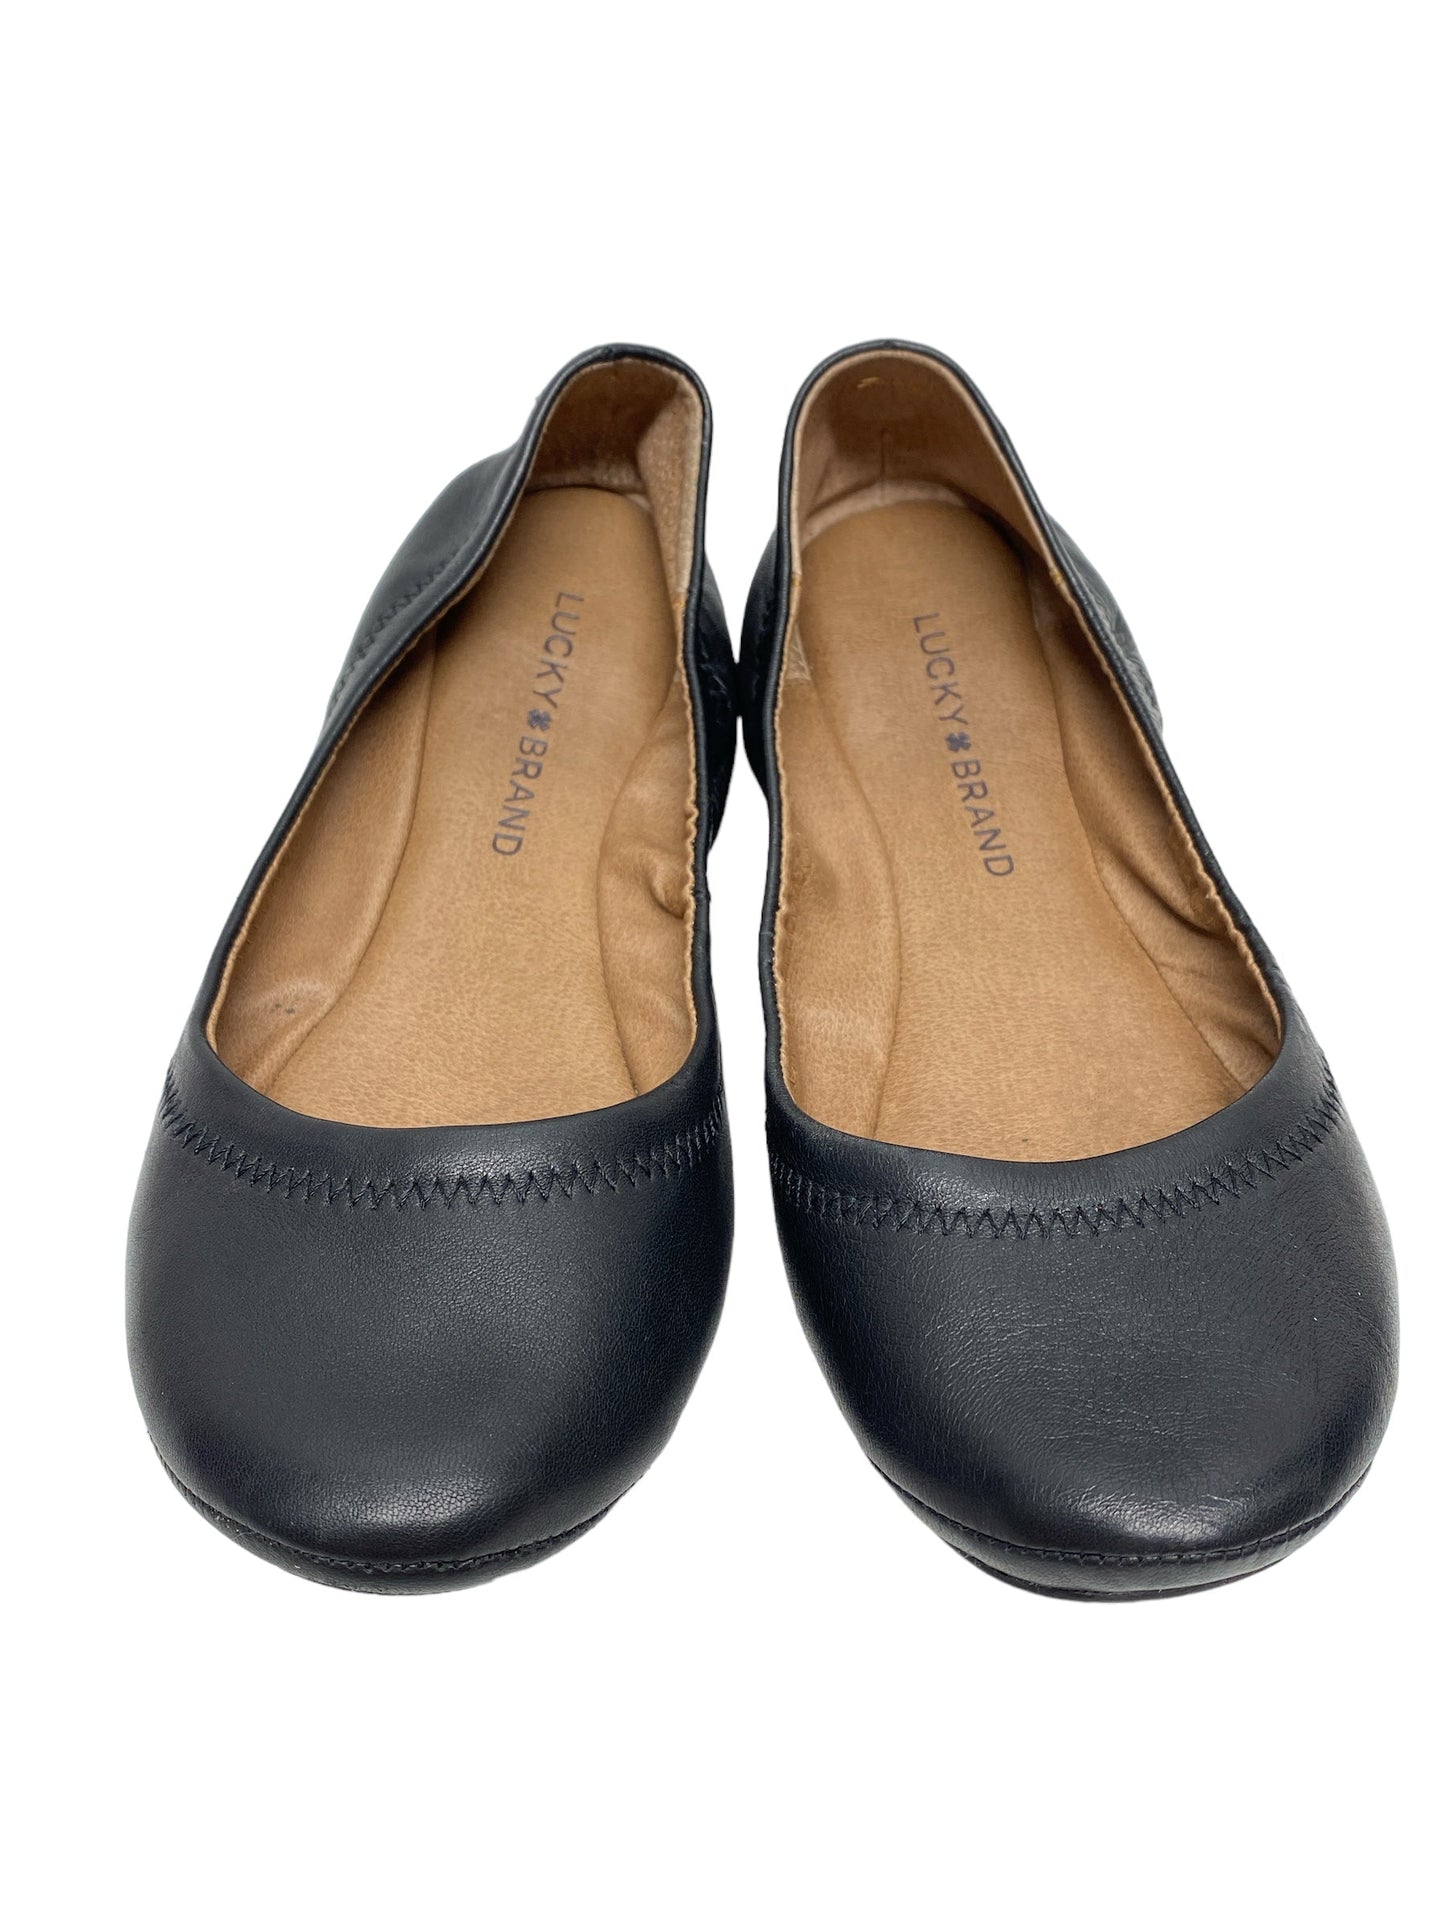 Shoes Flats Ballet By Lucky Brand  Size: 6